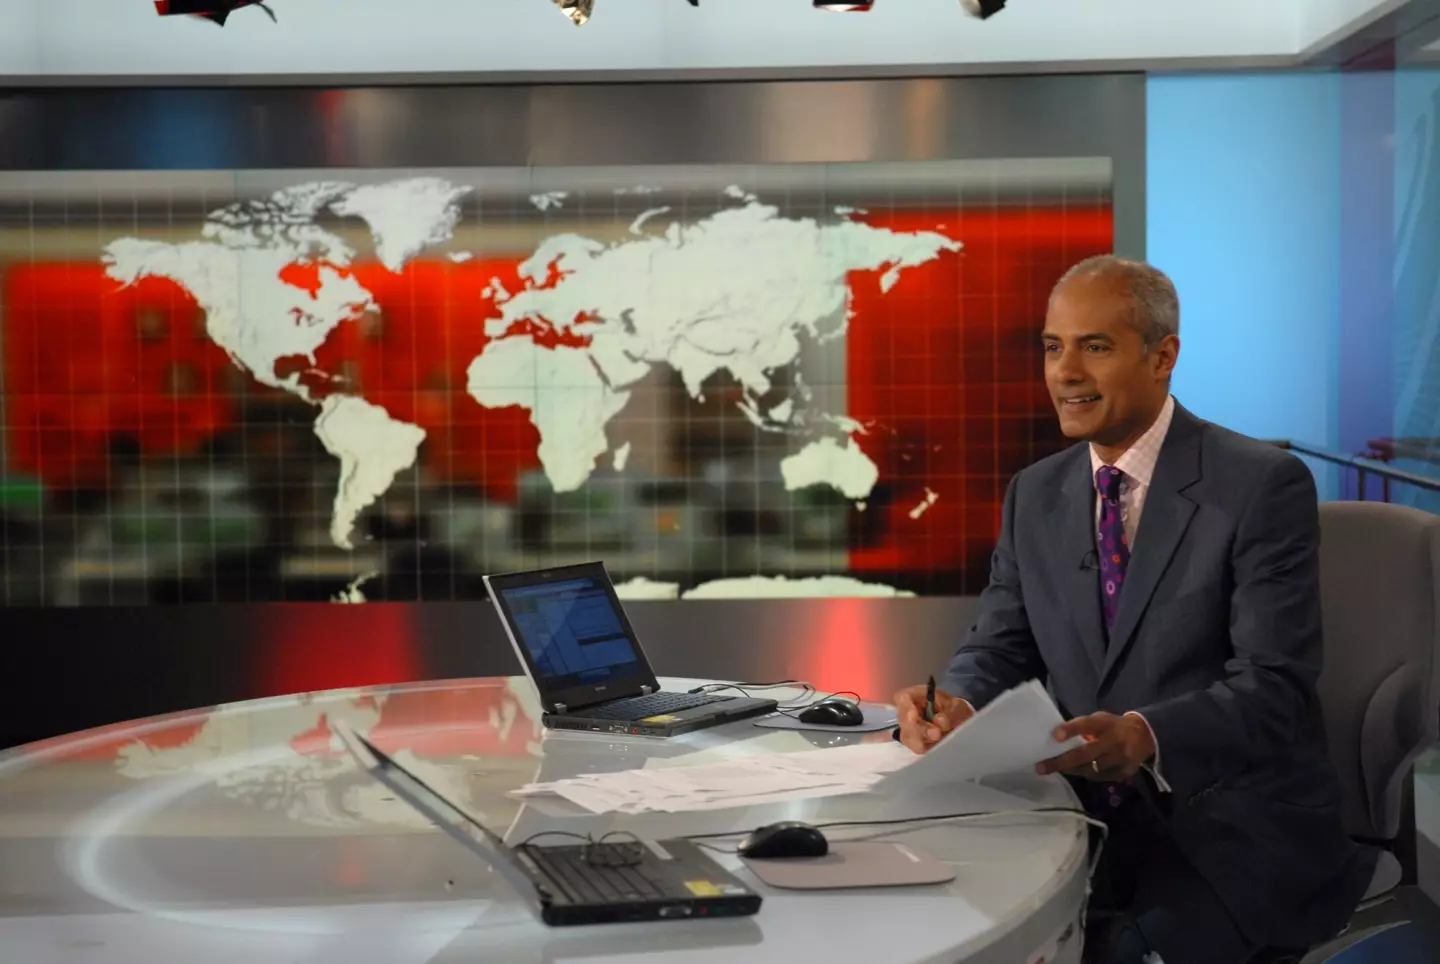 Alagiah worked at the BBC for over three decades.